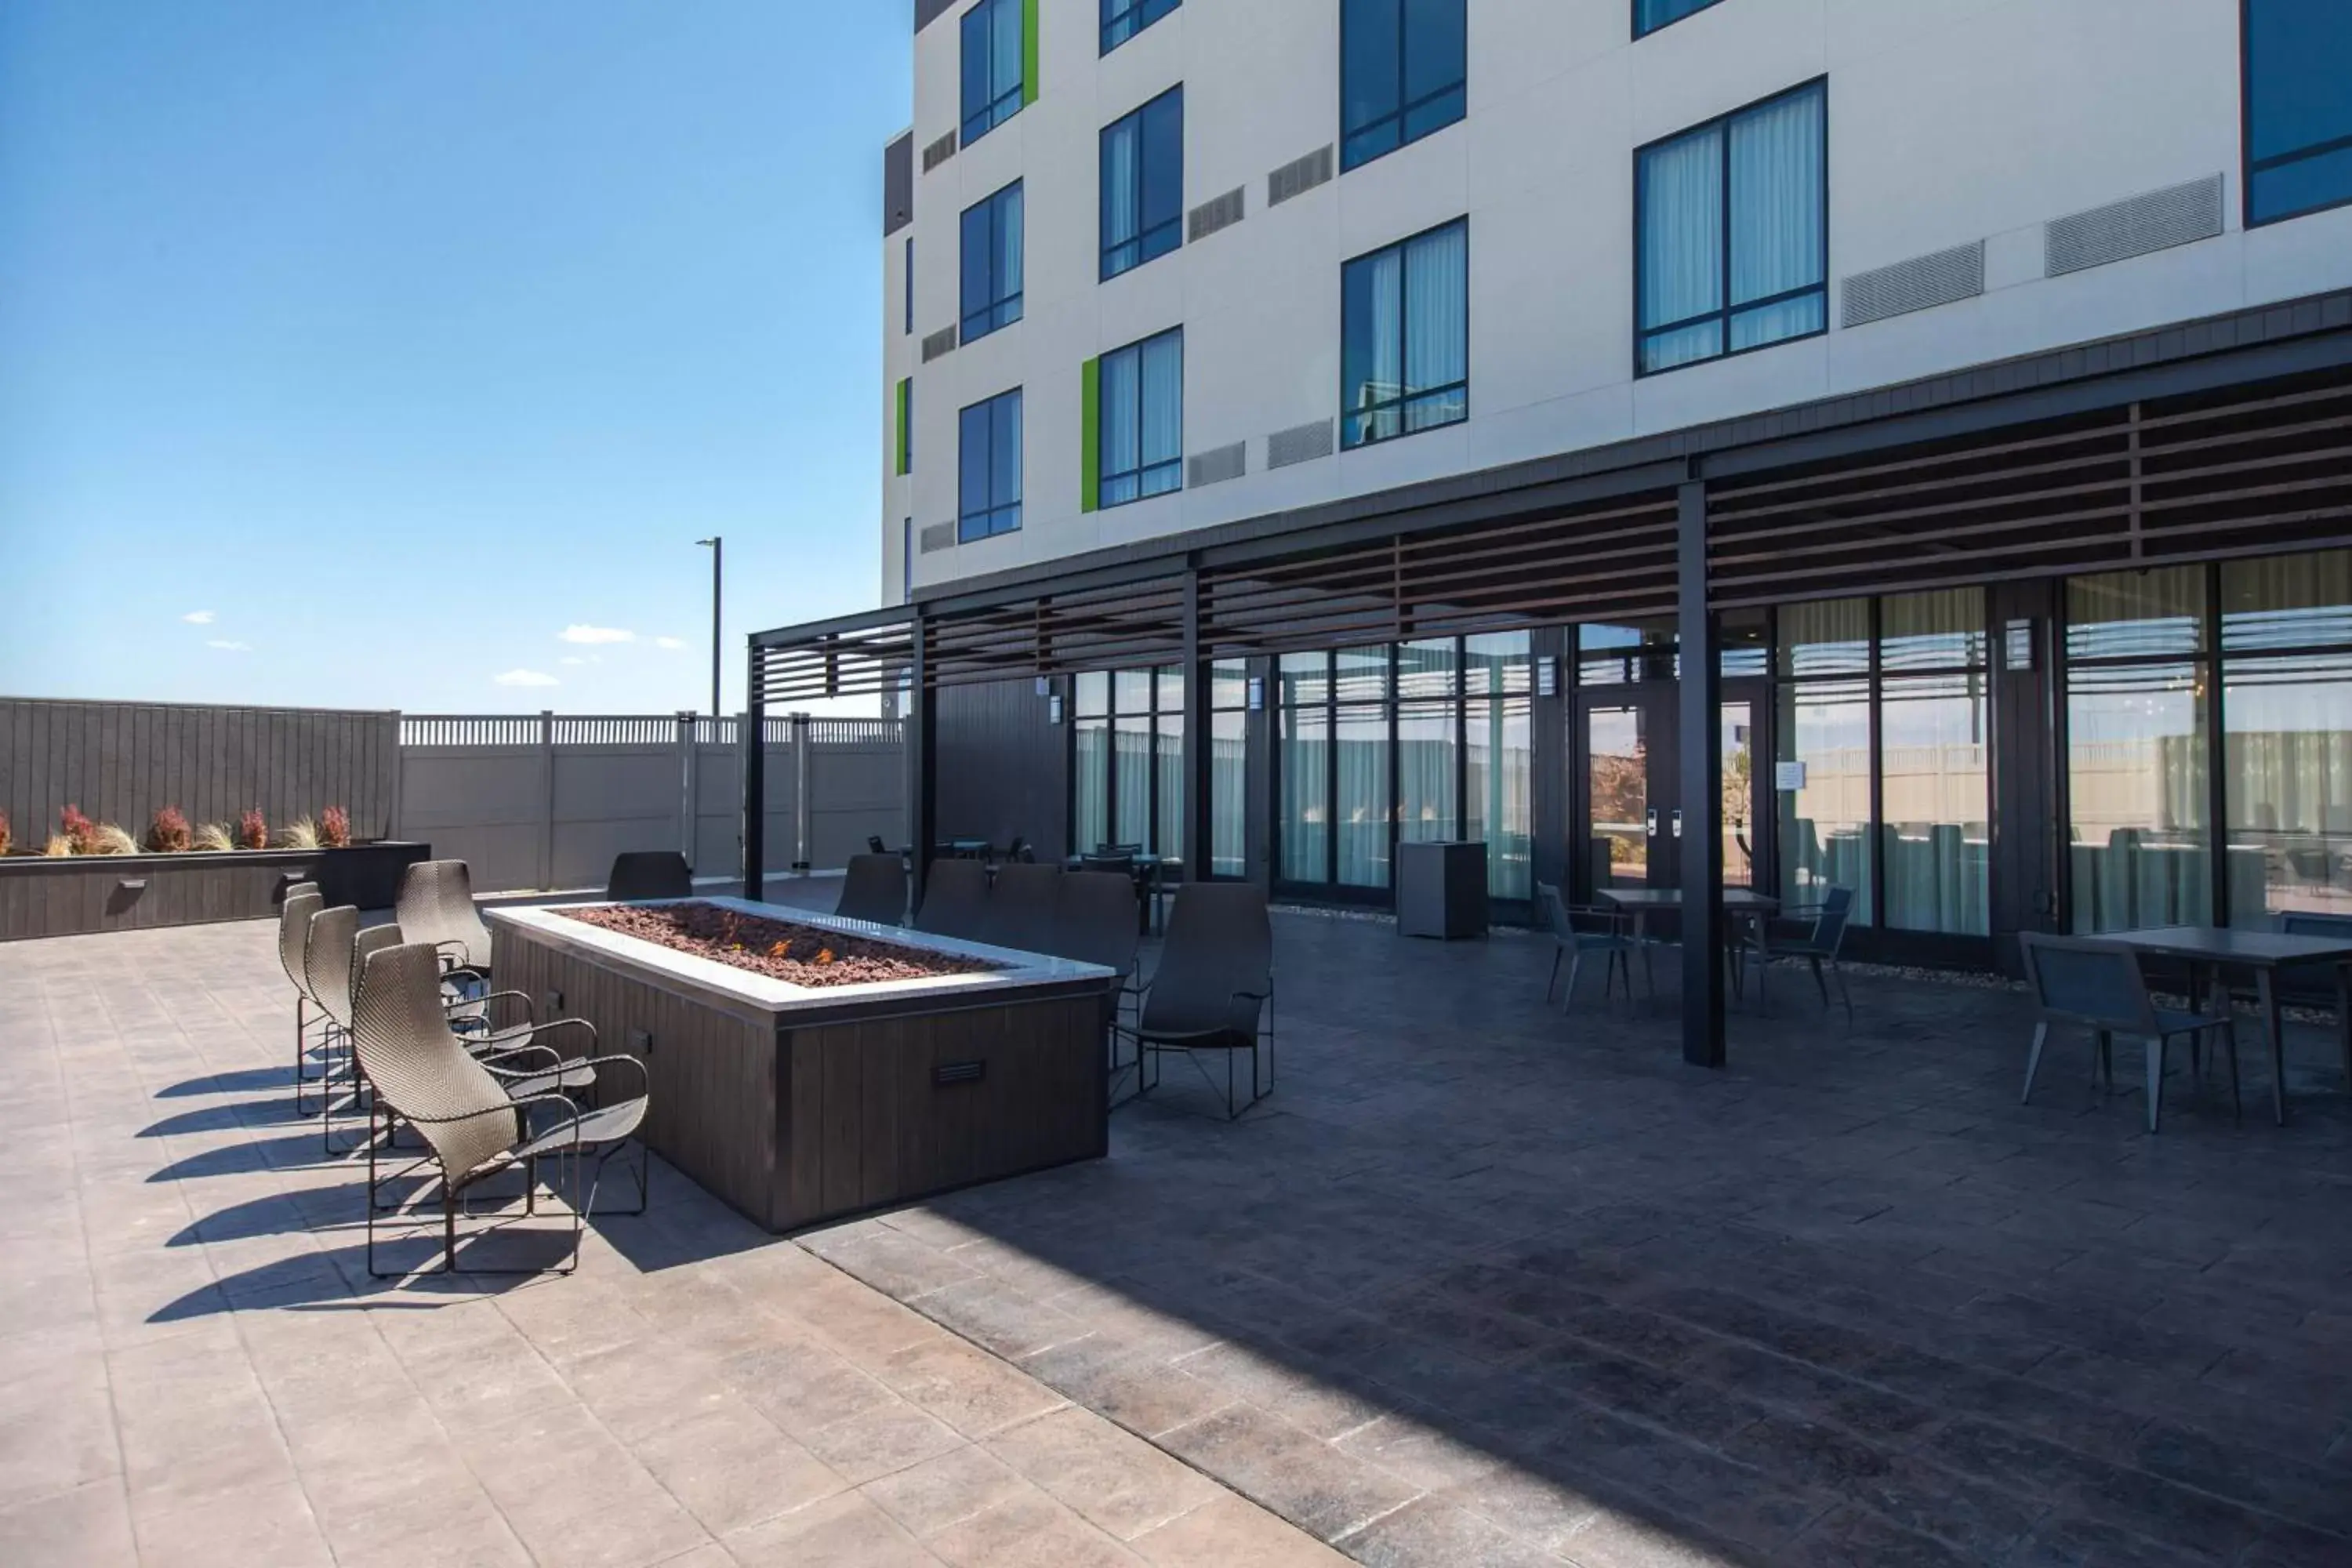 Property building in Courtyard by Marriott Rapid City